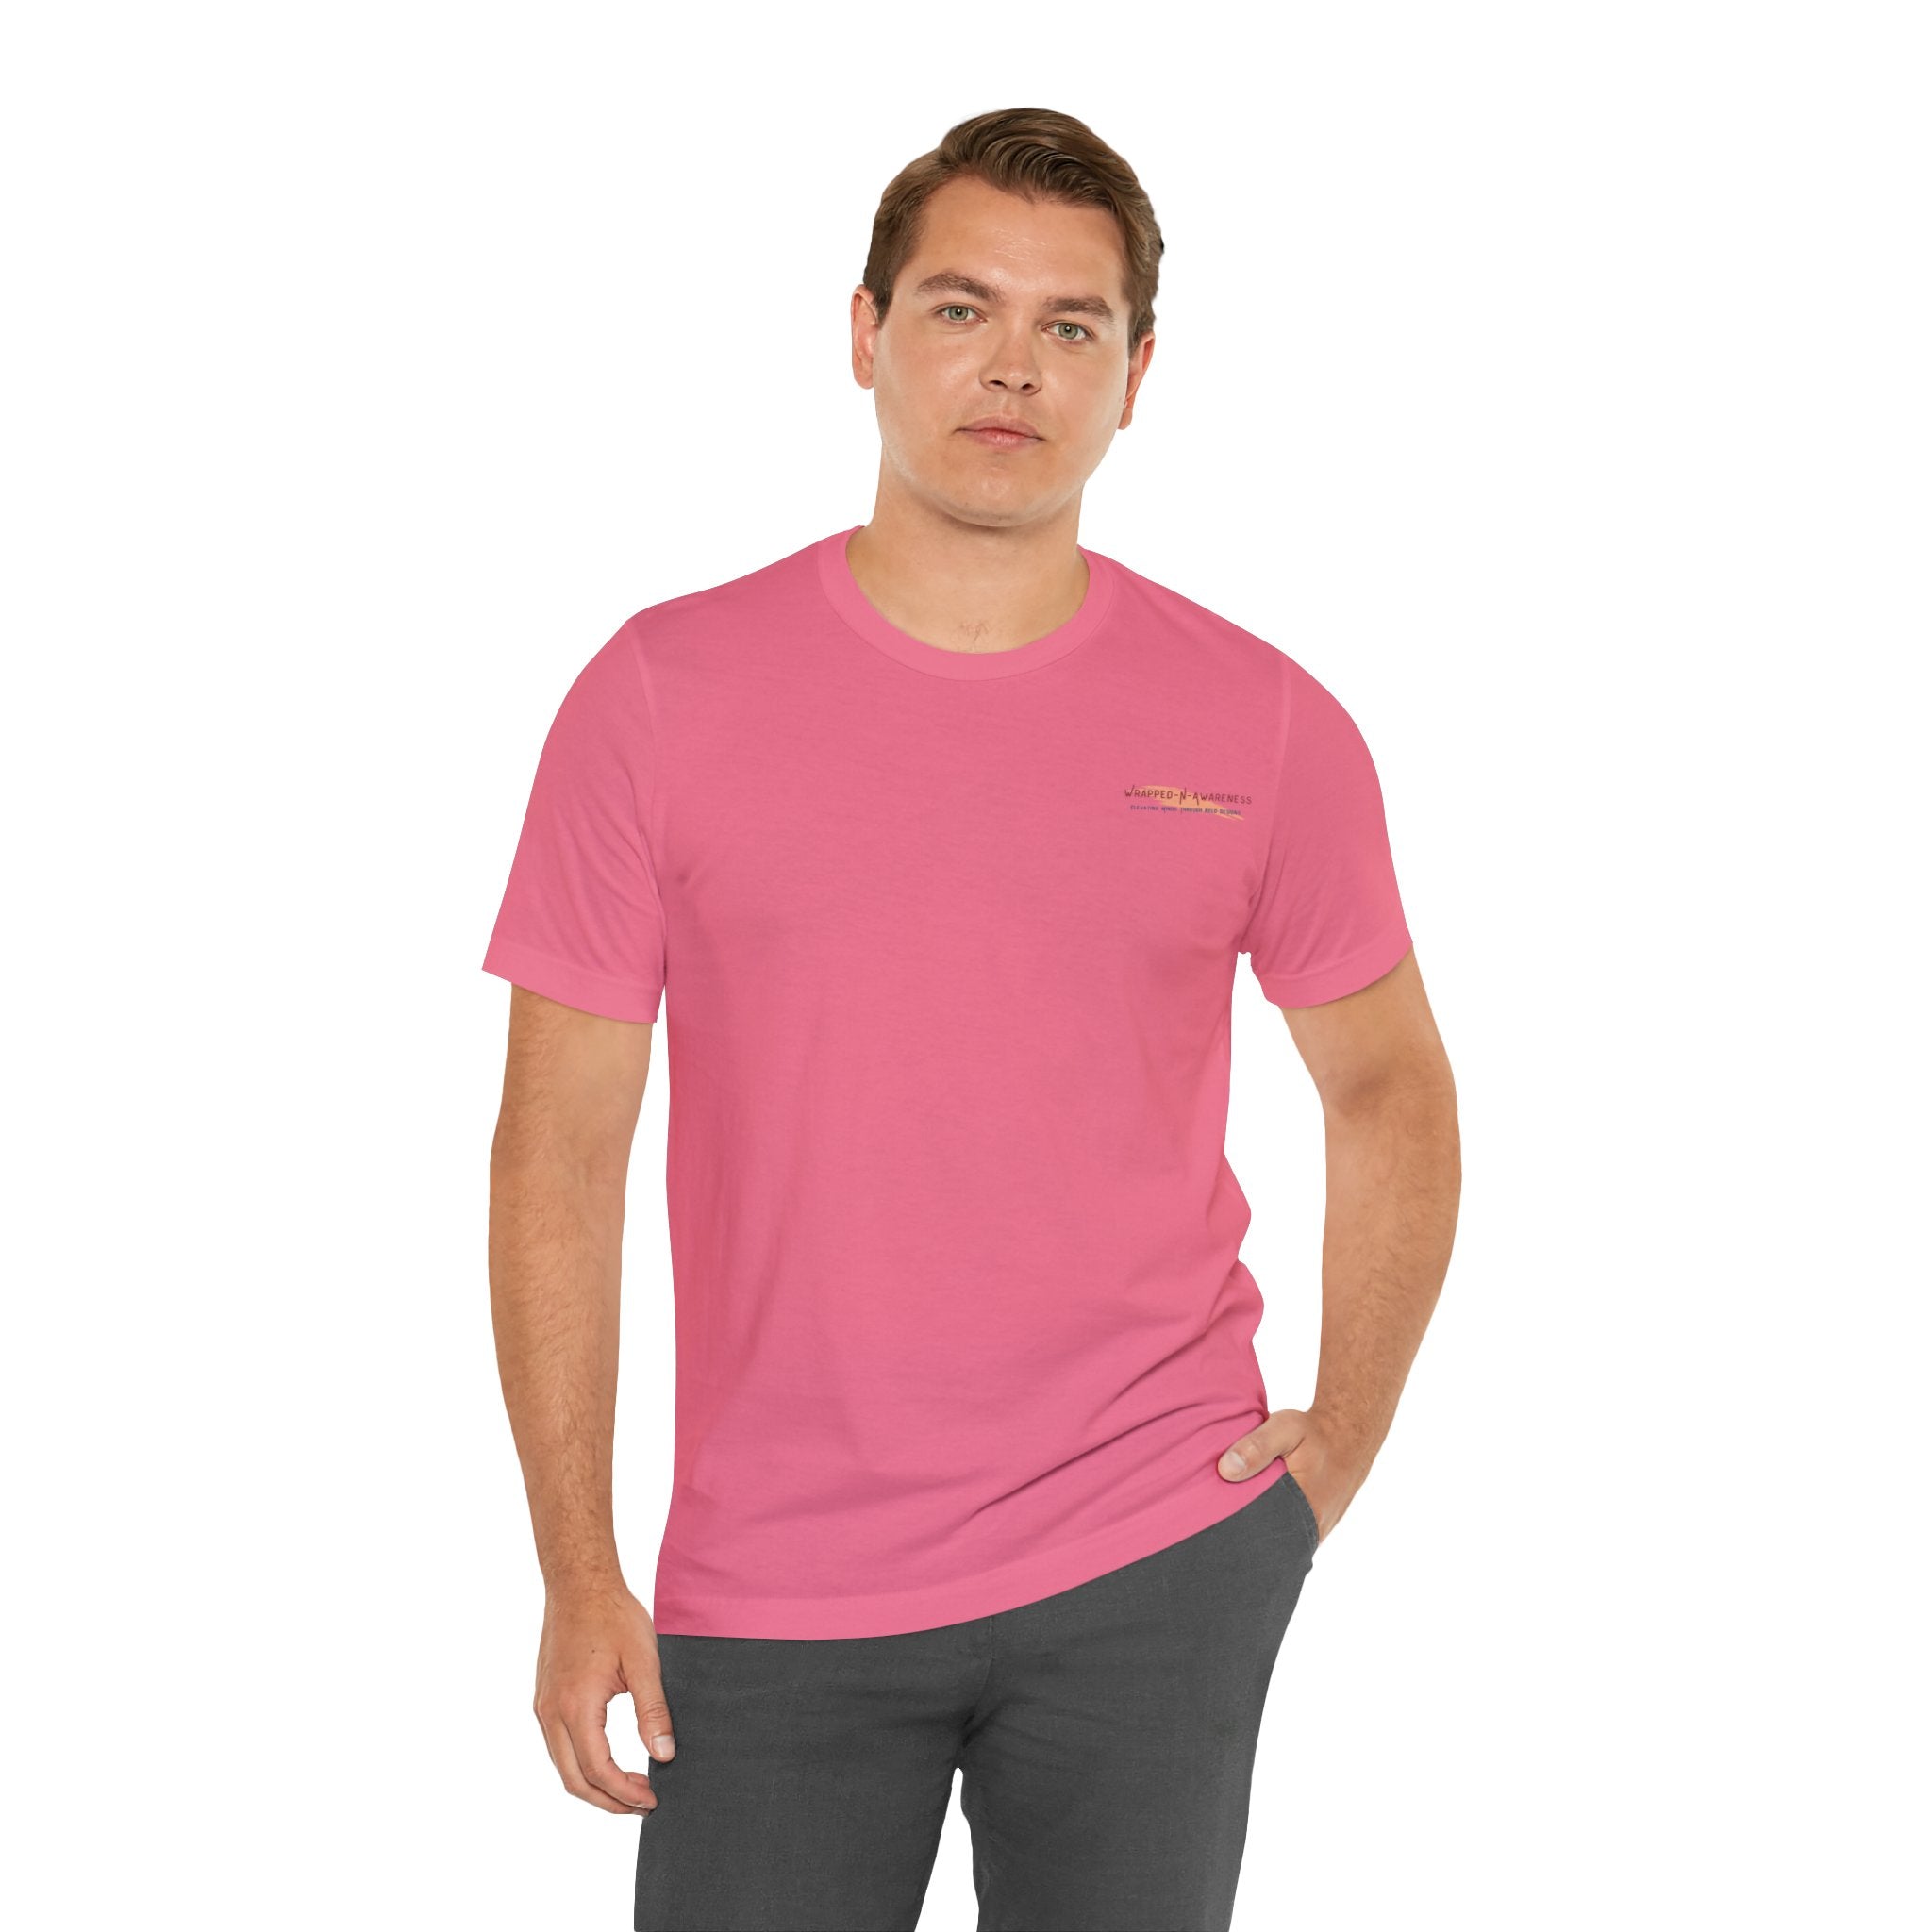 Brave Blossoms Jersey Tee - Bella+Canvas 3001 Charity Pink Classic Tee Comfortable Tee Cotton T-Shirt Graphic Tee JerseyTee Statement Shirt T-shirt Tee Unisex Apparel T-Shirt 15937733318586177193_2048 Printify